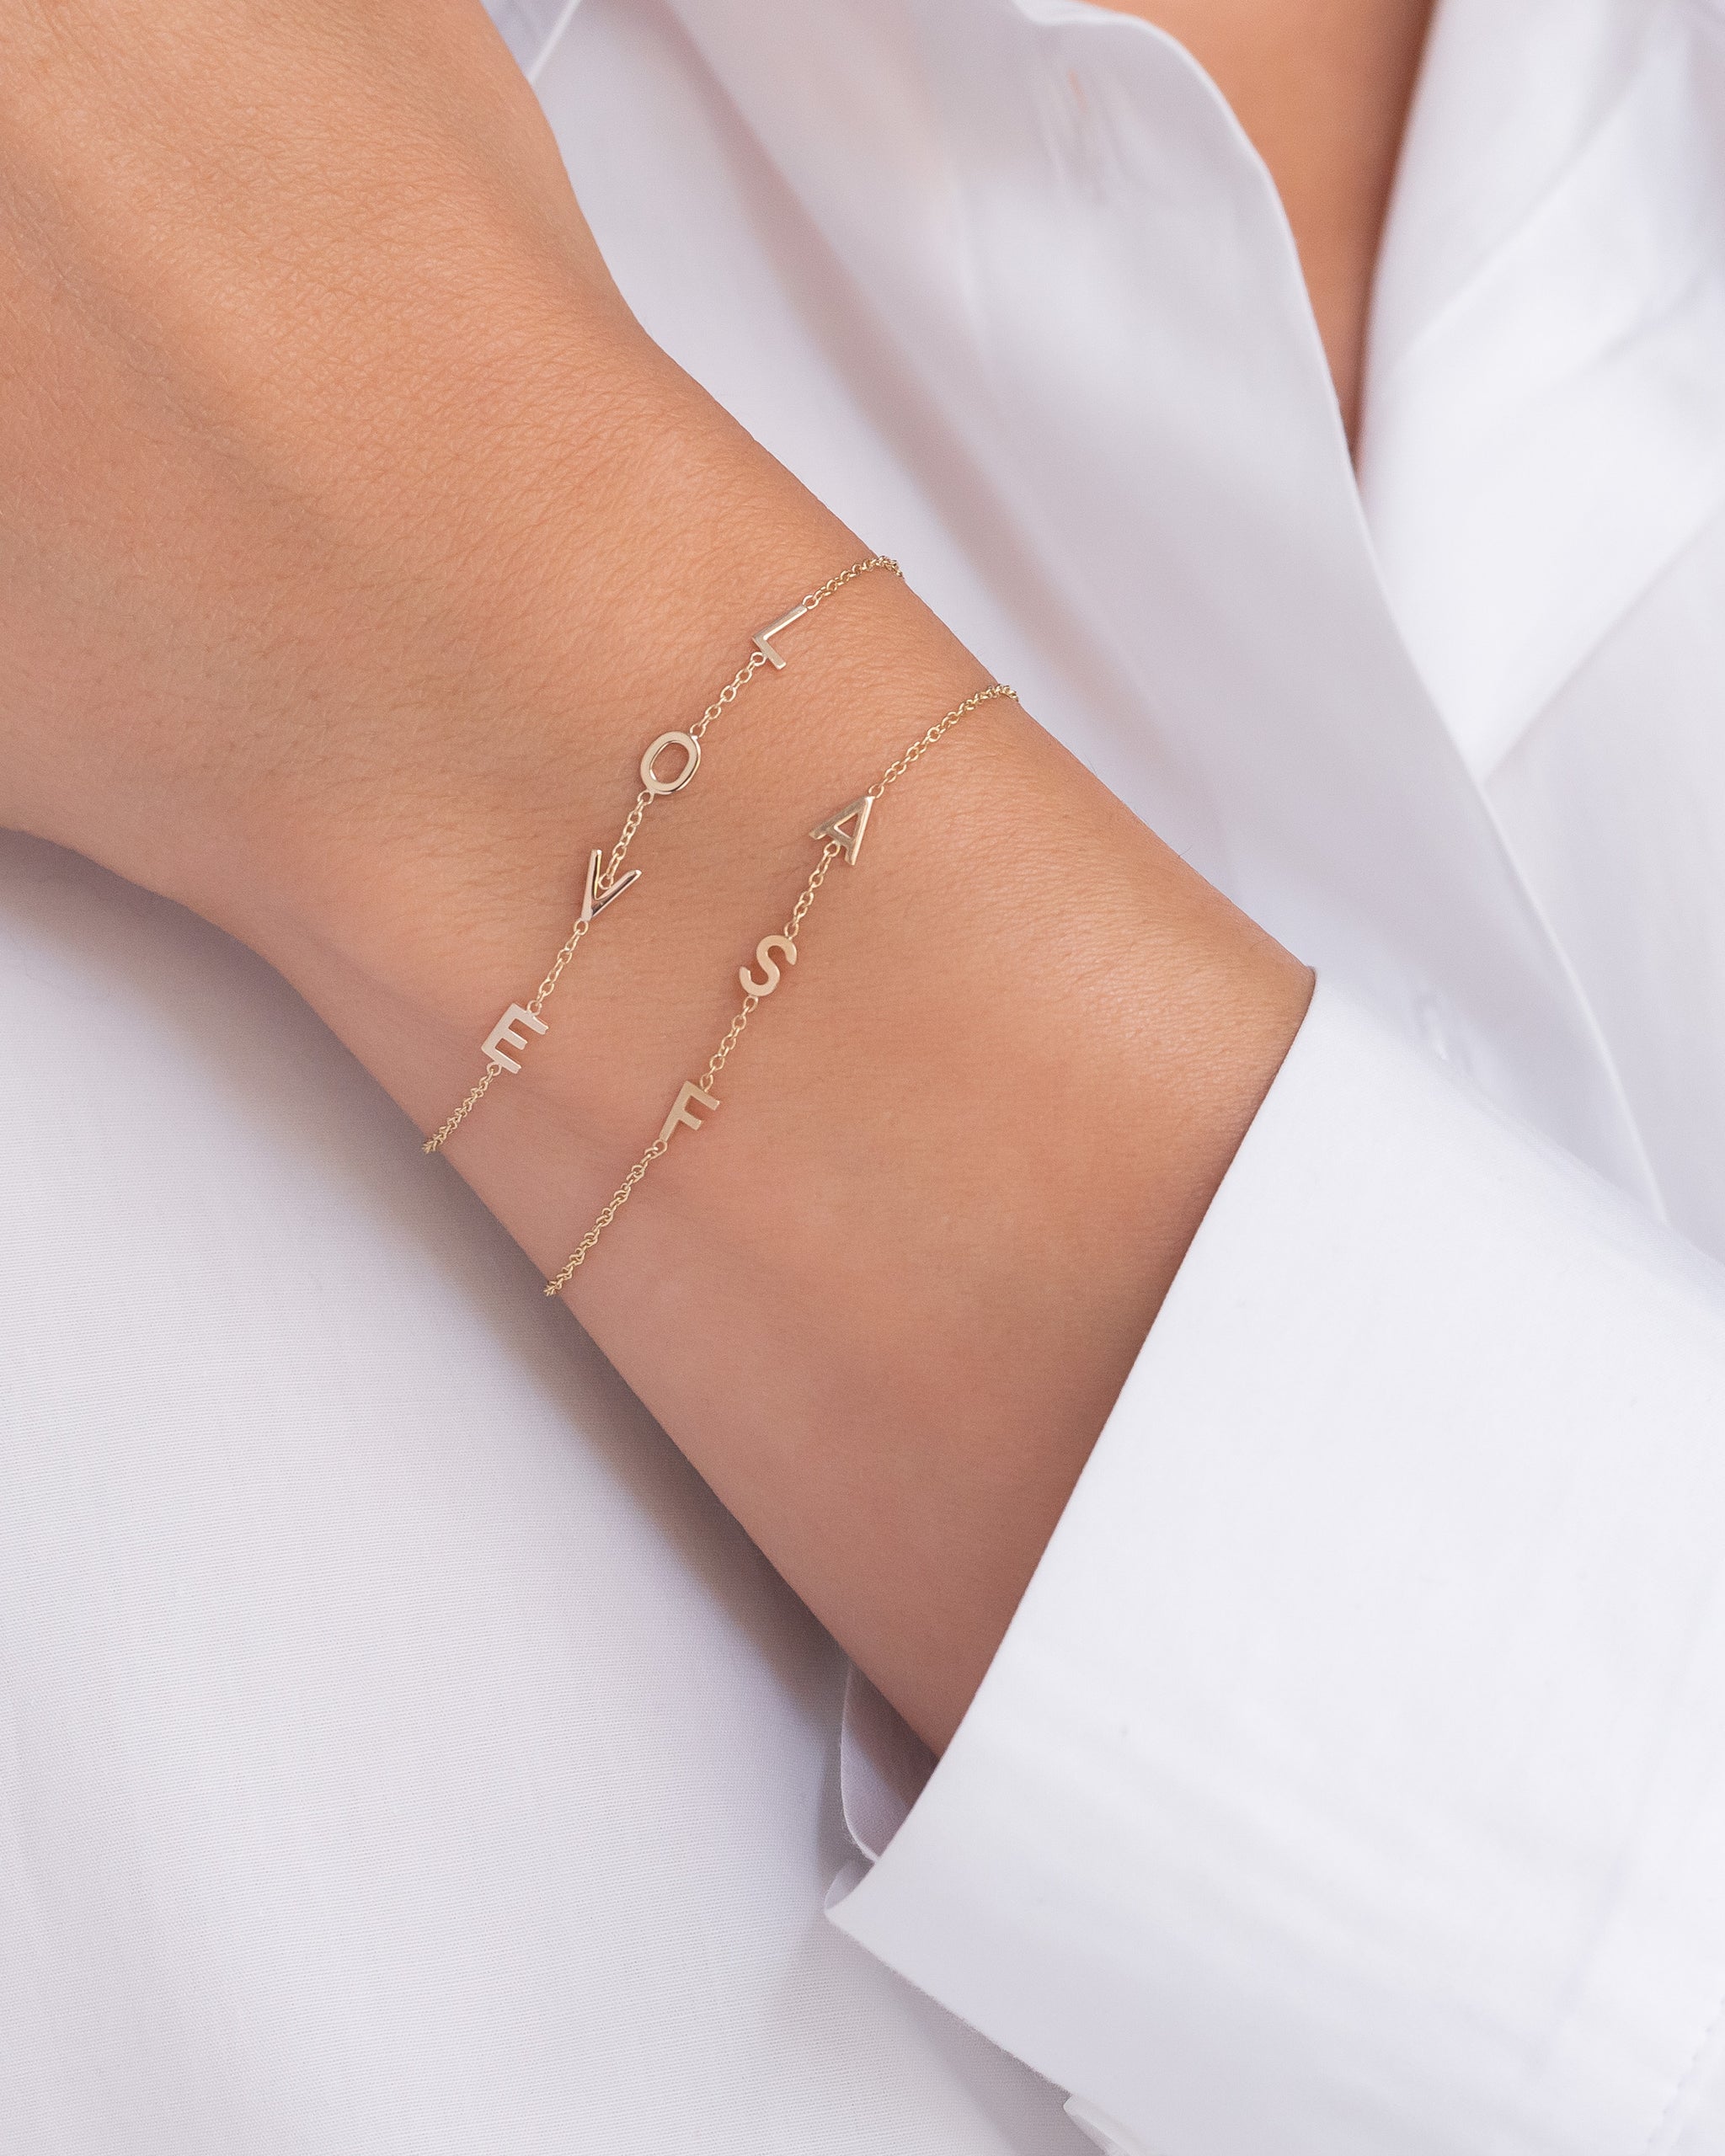 Two Initial Rose Gold Personalized Bracelet Double Initial 